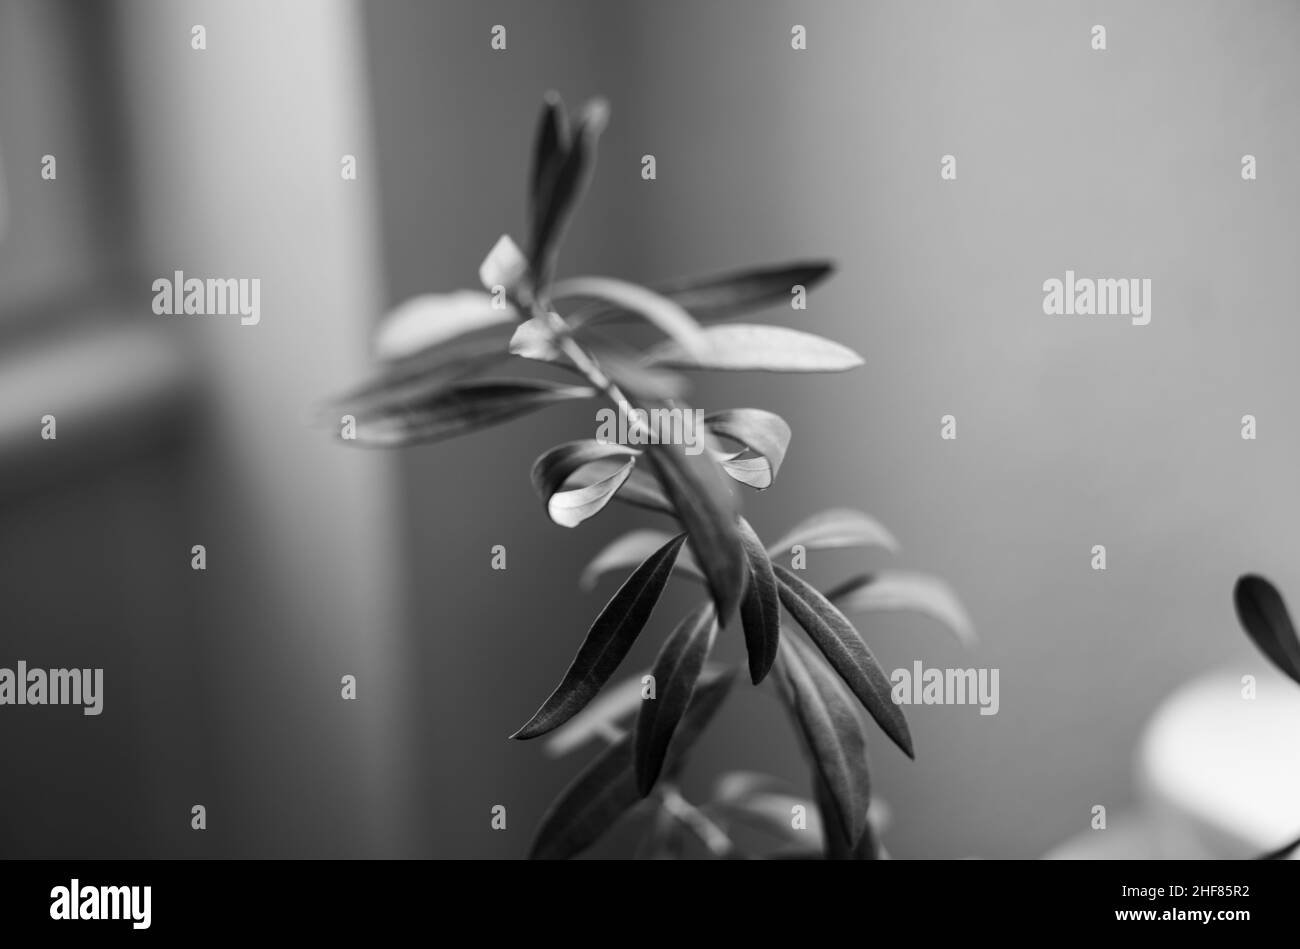 Olive branches,  black and white Stock Photo